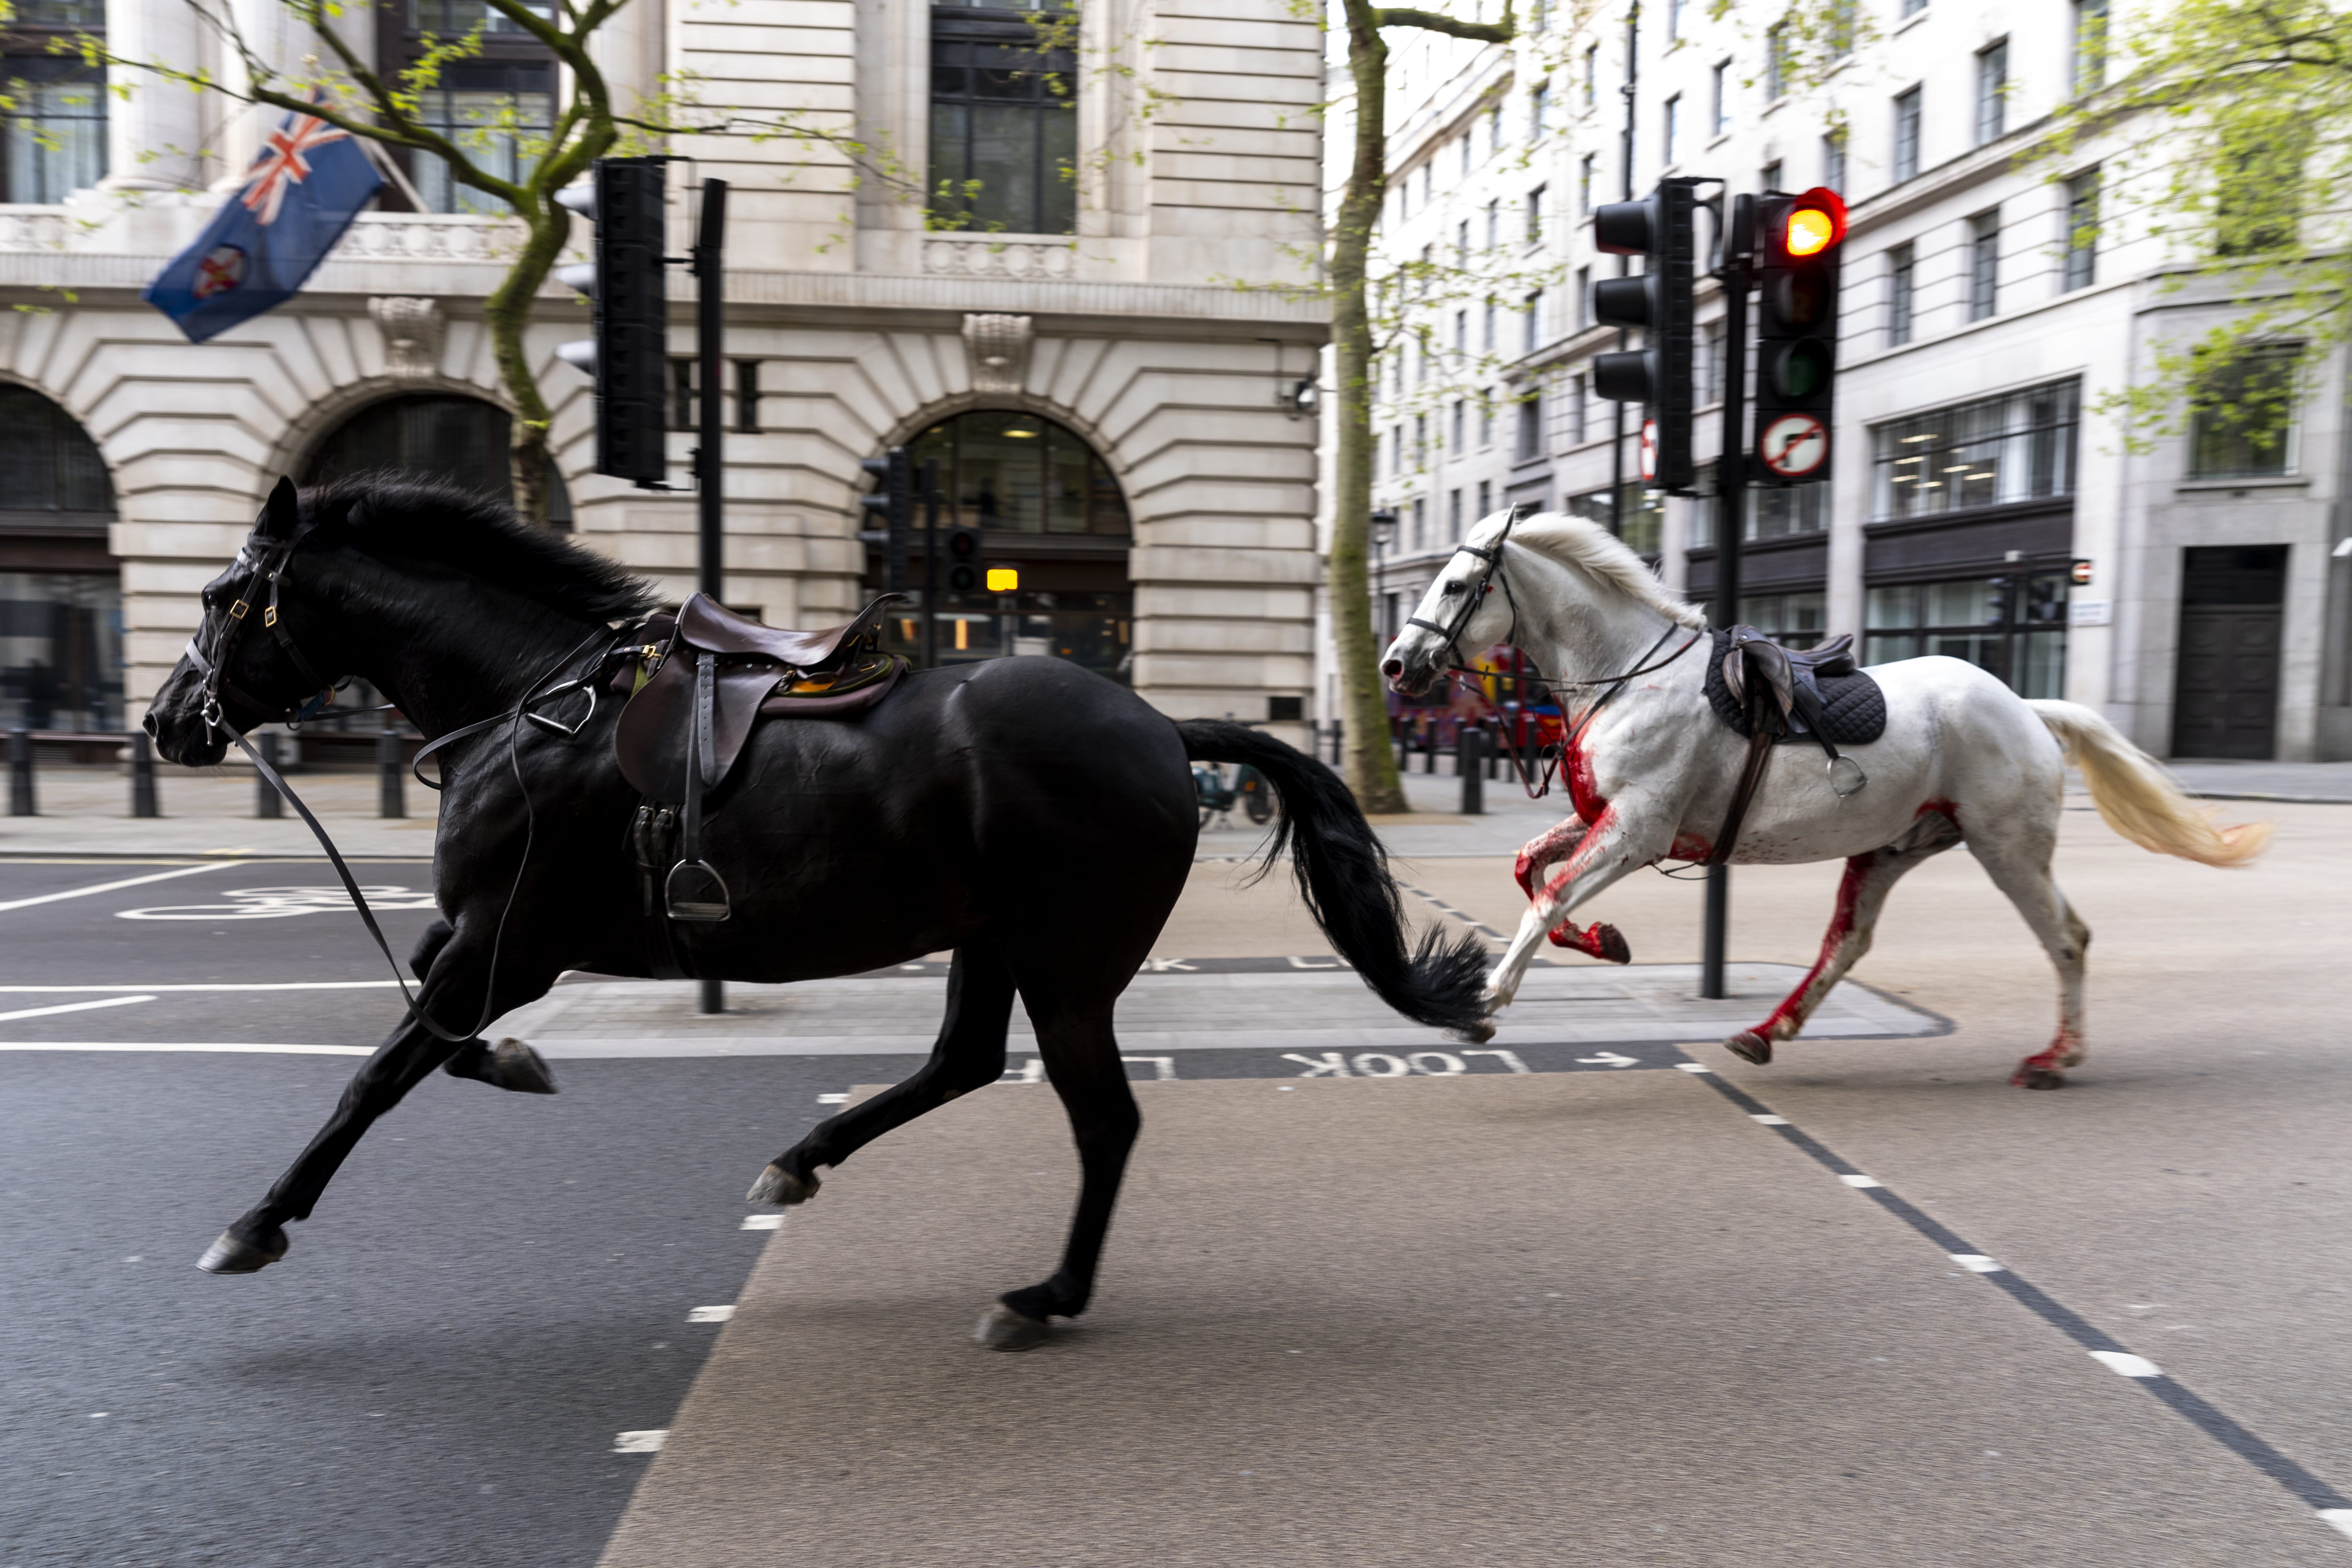 Two military horses on the loose bolt through the streets of London near Aldwych